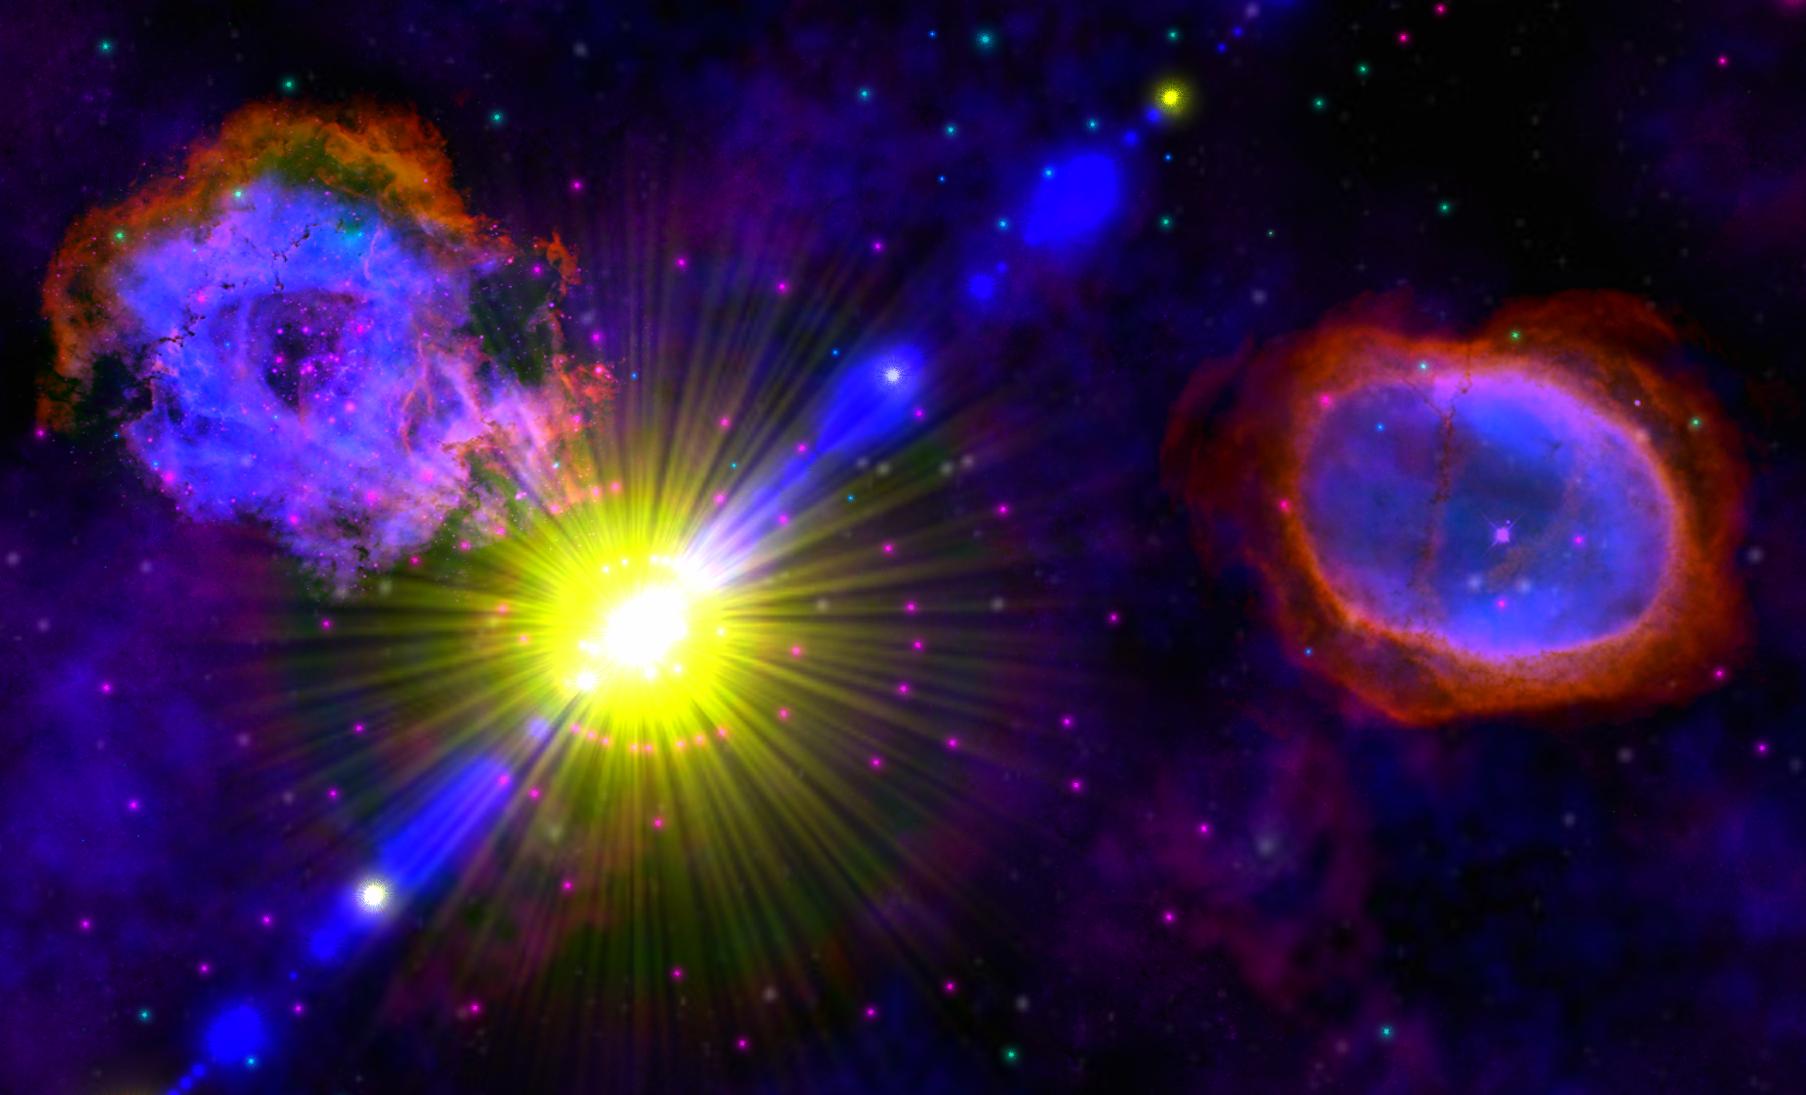 Universe Music Visualizer for Android - APK Download